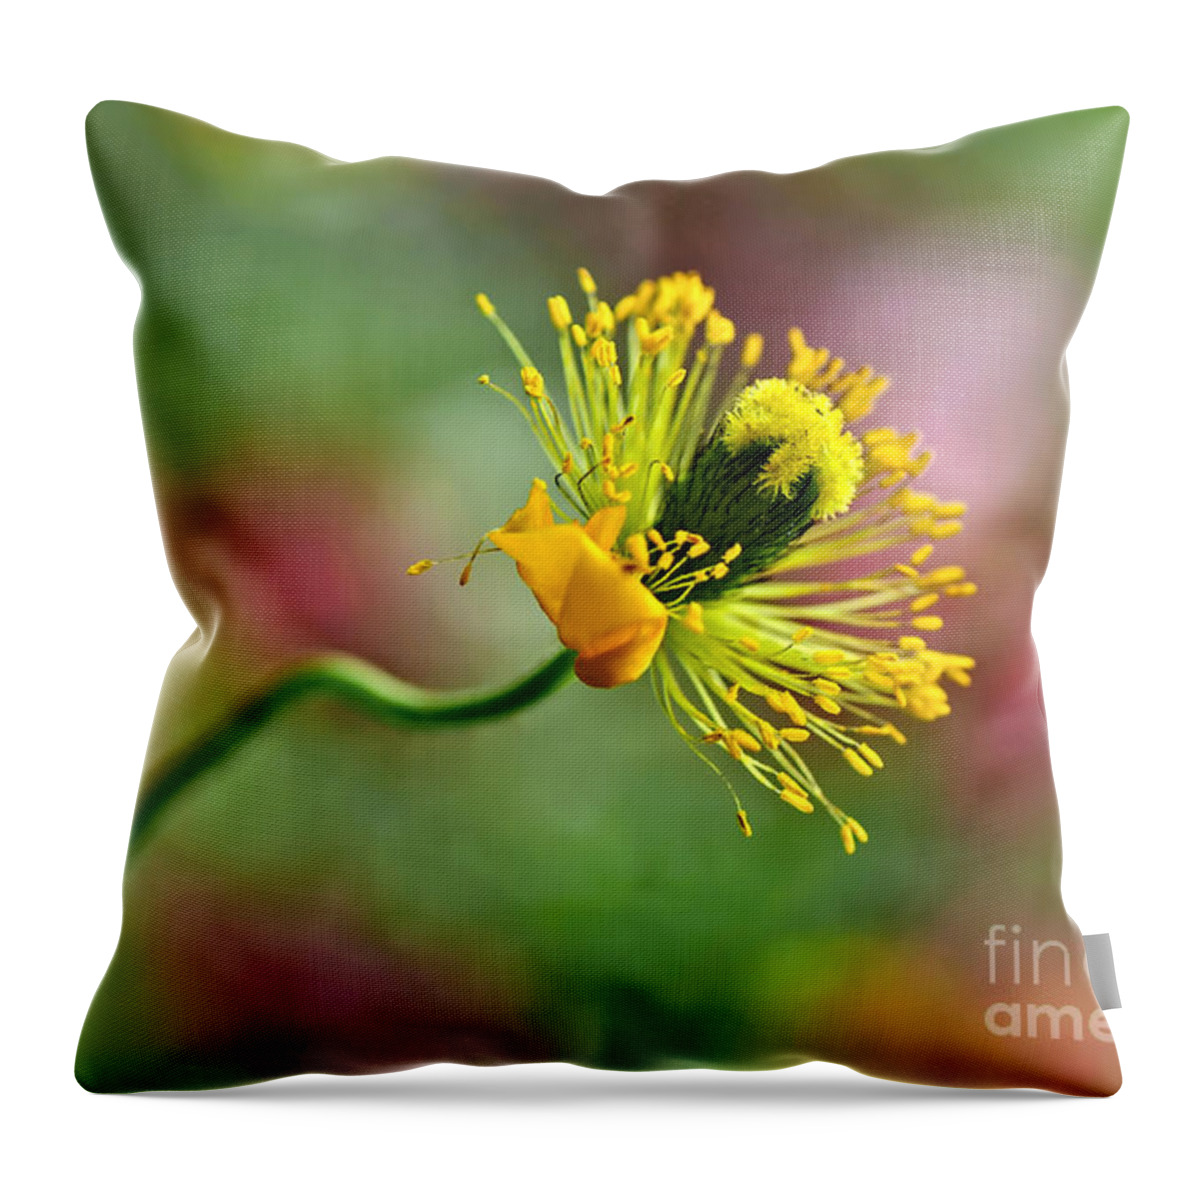 Photography Throw Pillow featuring the photograph Poppy Seed Capsule by Kaye Menner